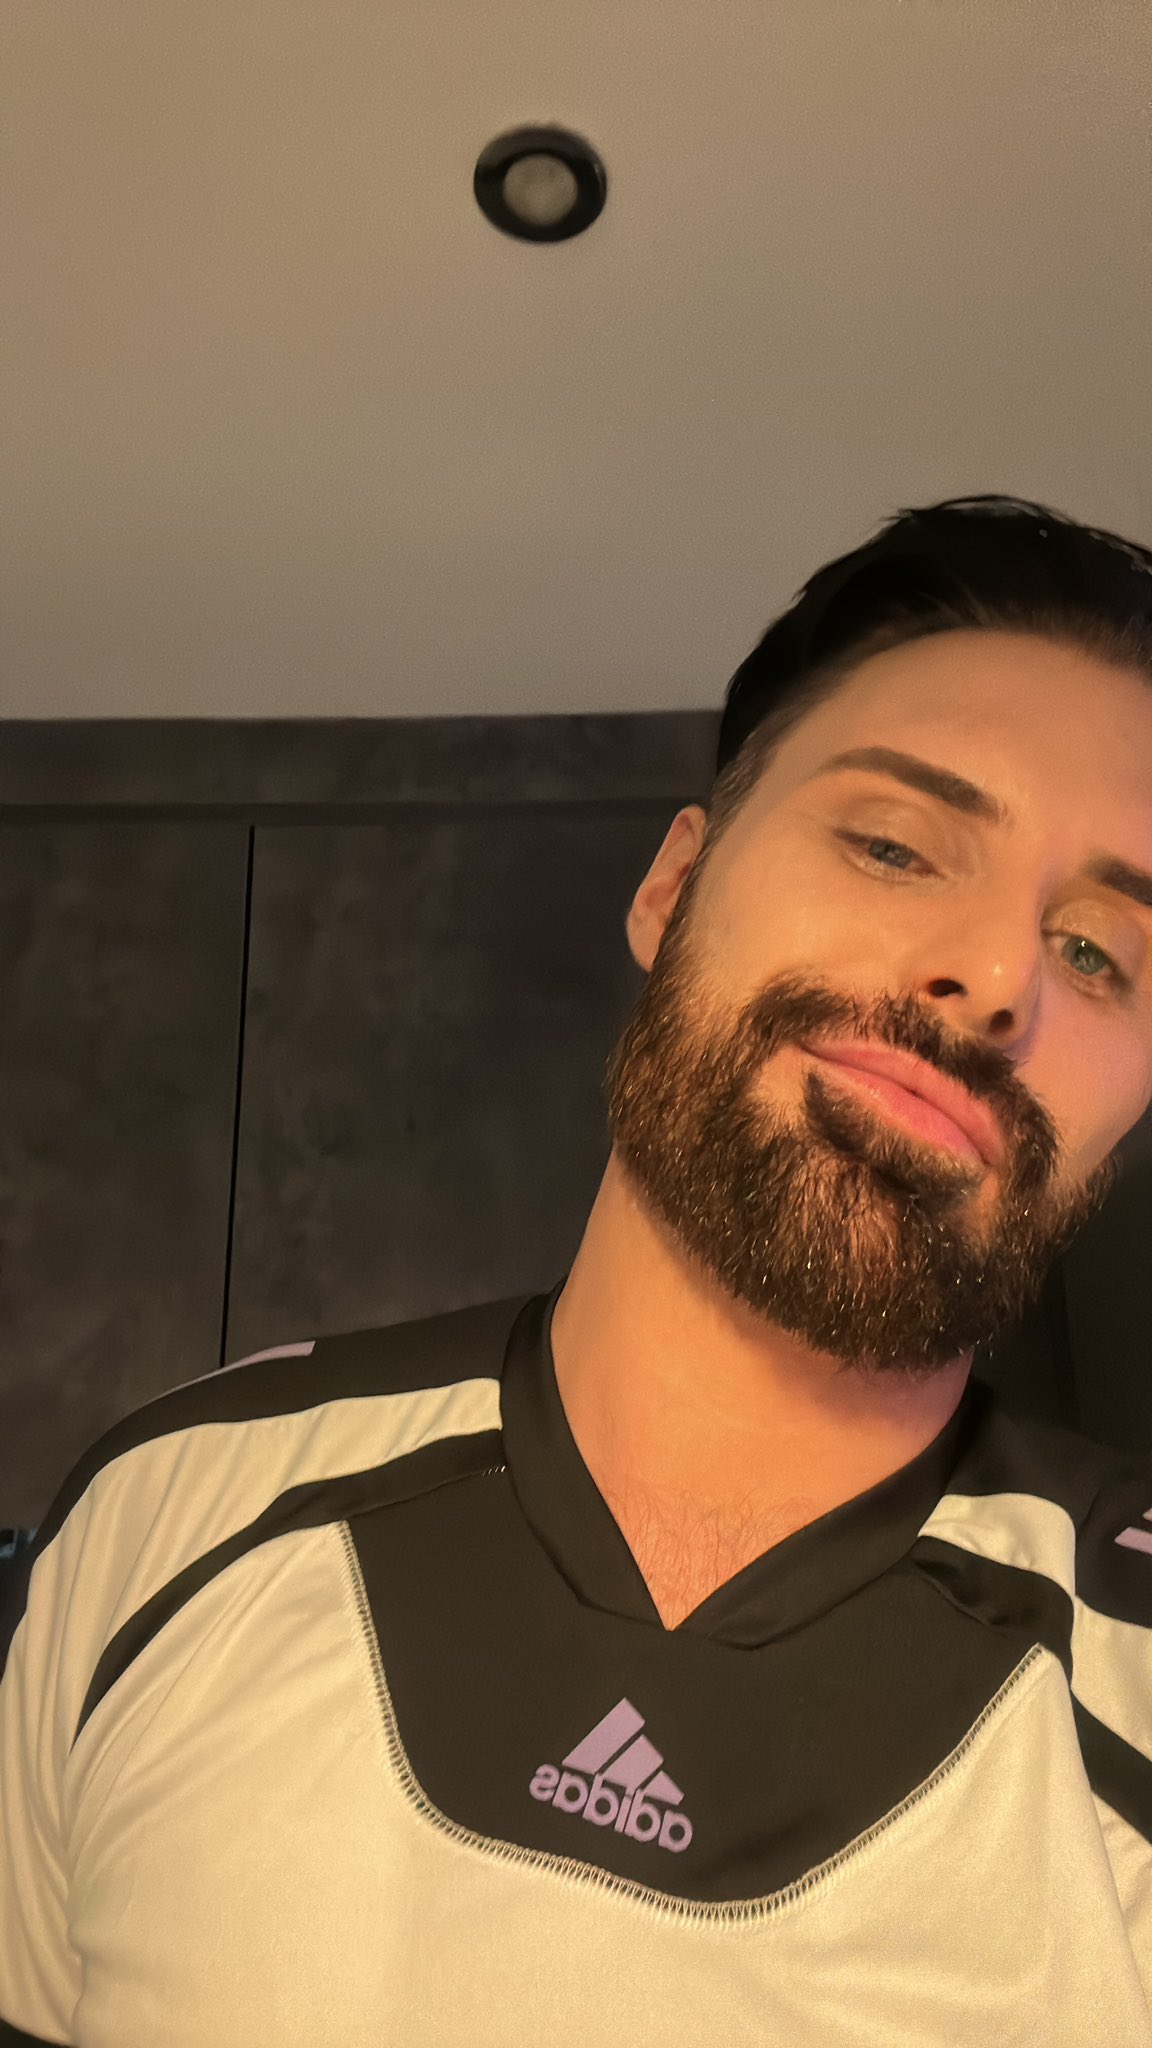 Rylan shows off his ‘natural ginger hair’ after running out of beard dye